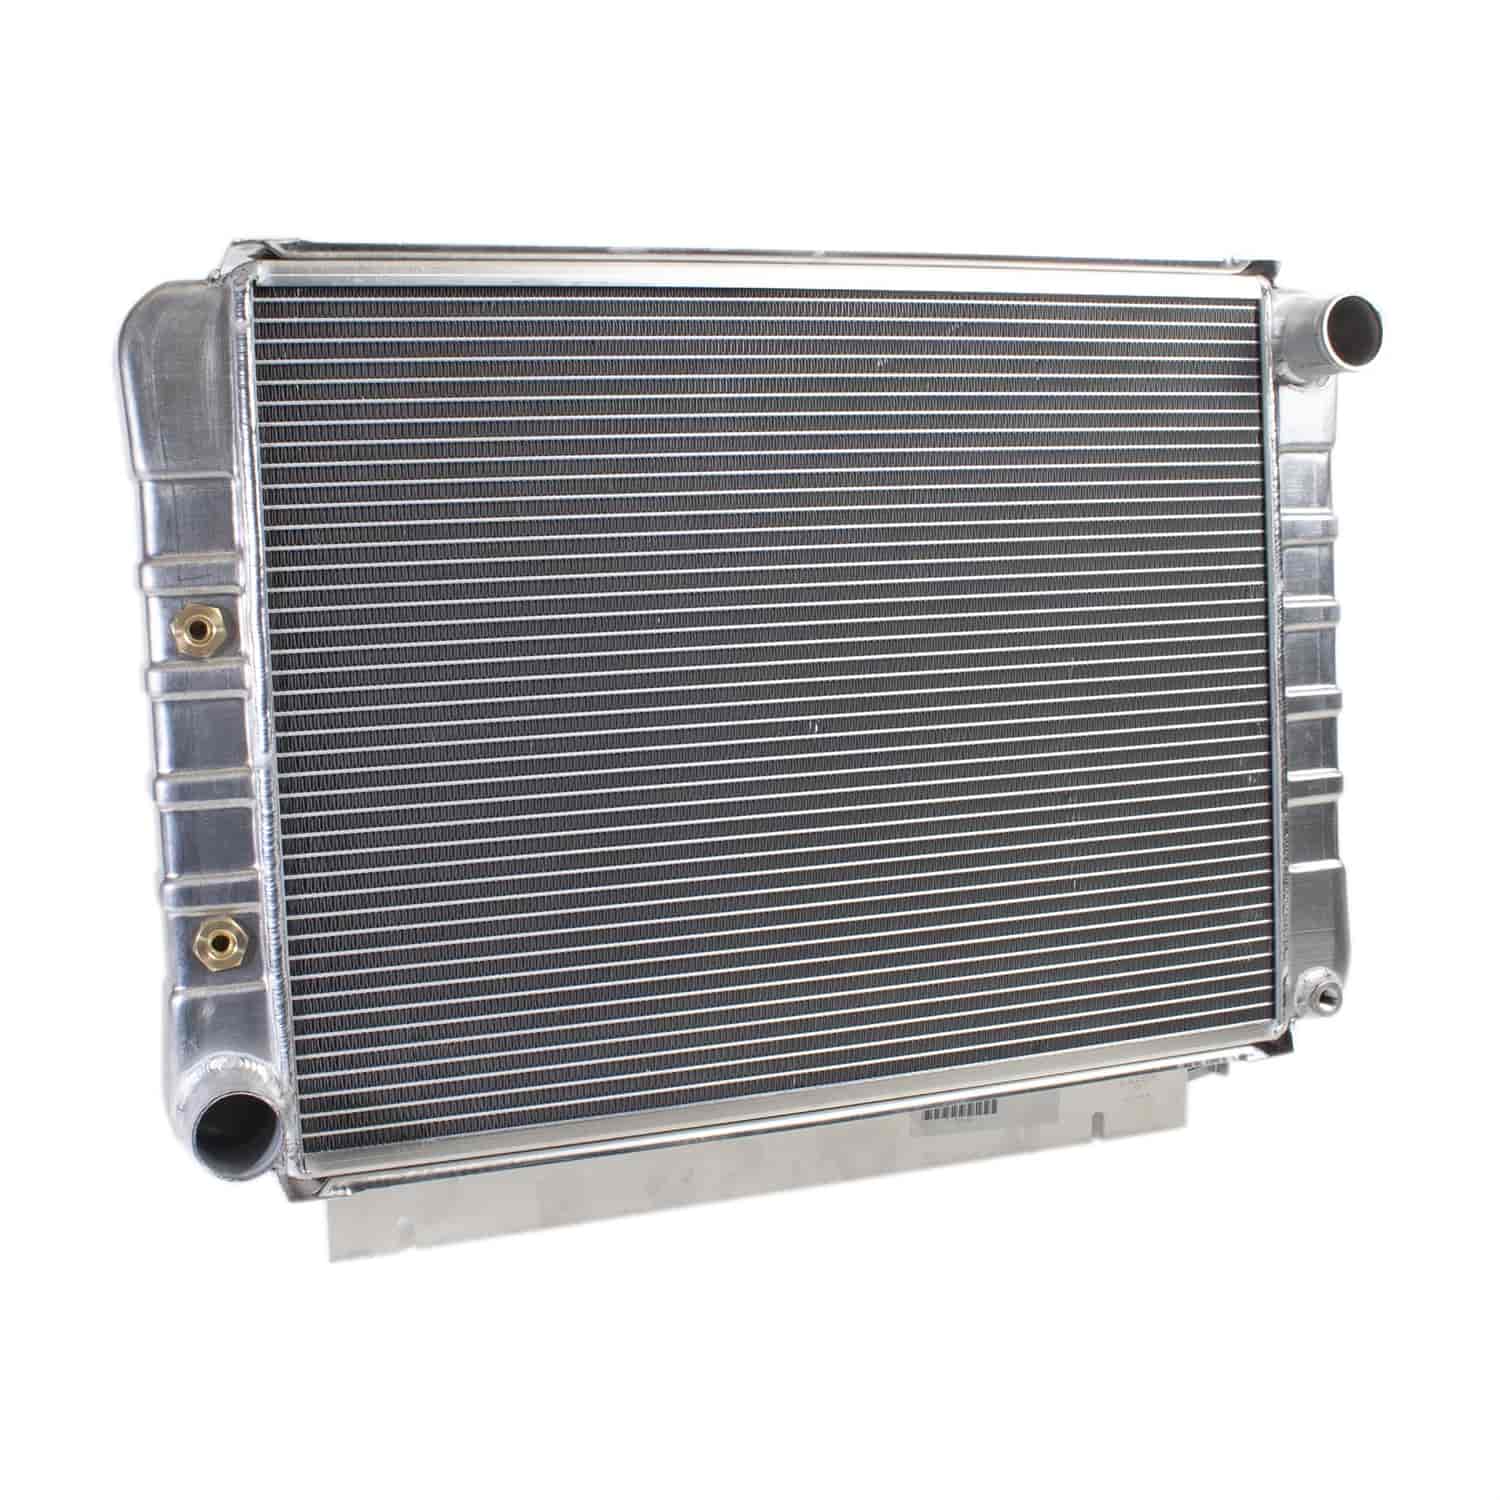 ExactFit Radiator for 1960-1963 Galaxie with Late Ford Small Block & Big Block